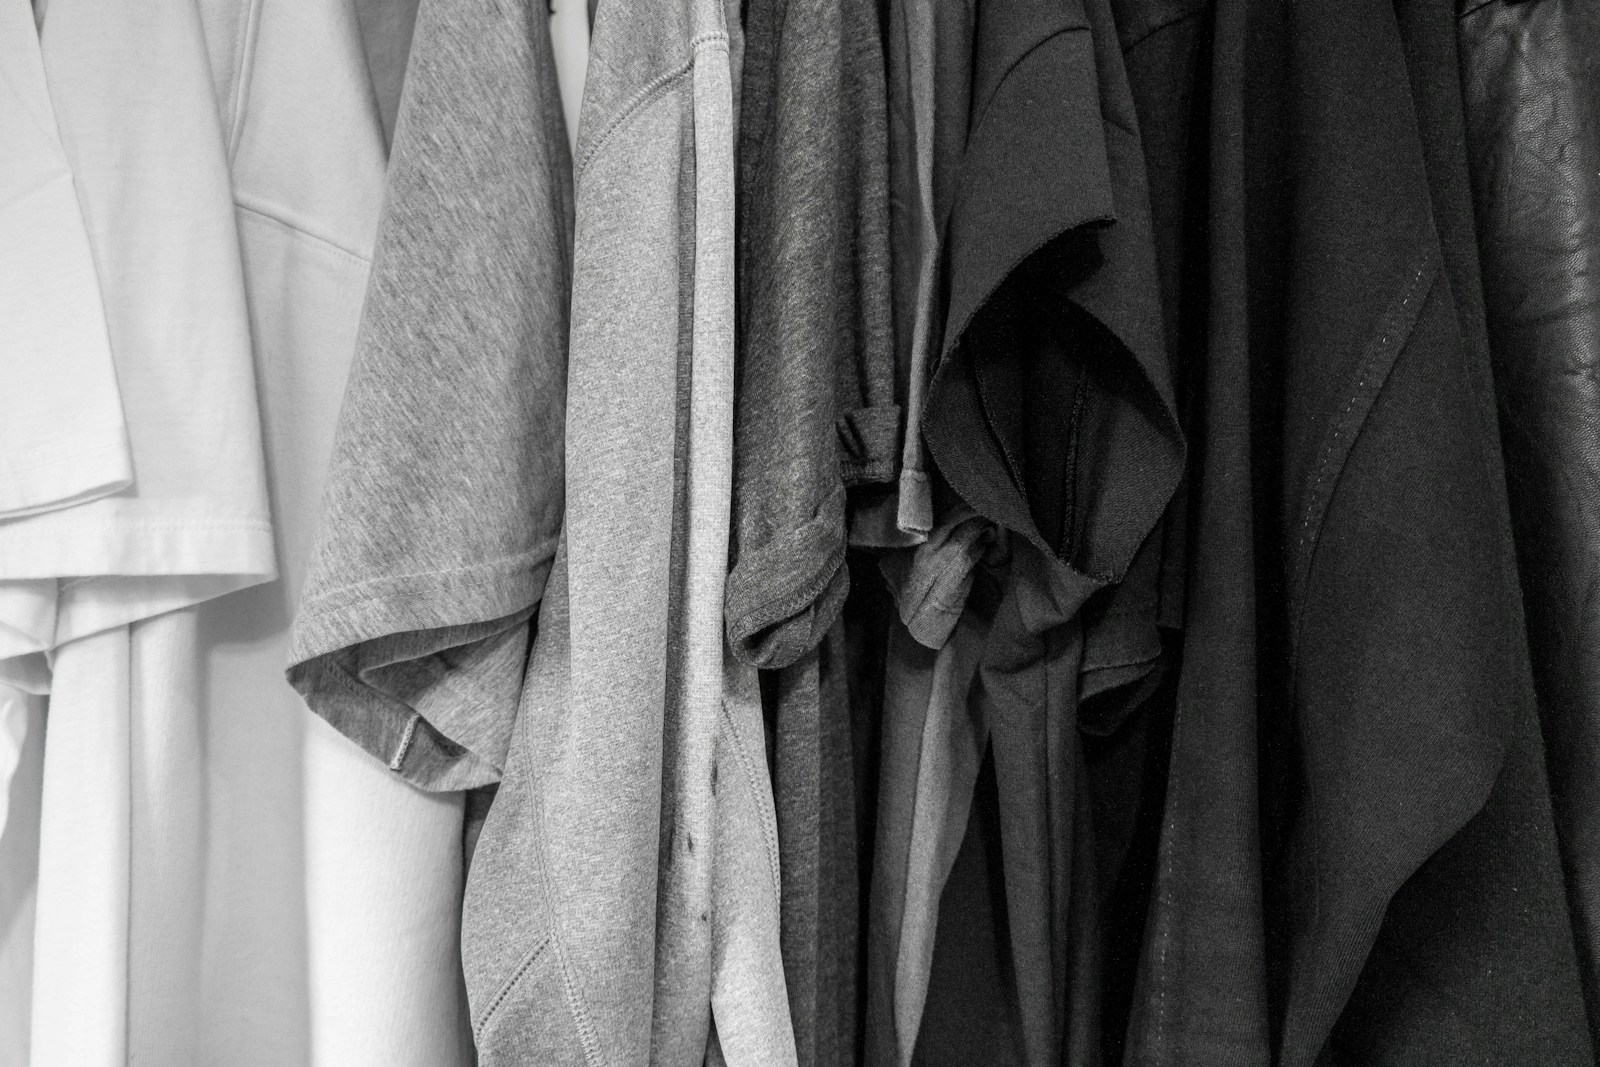 grayscale photography of assorted clothes